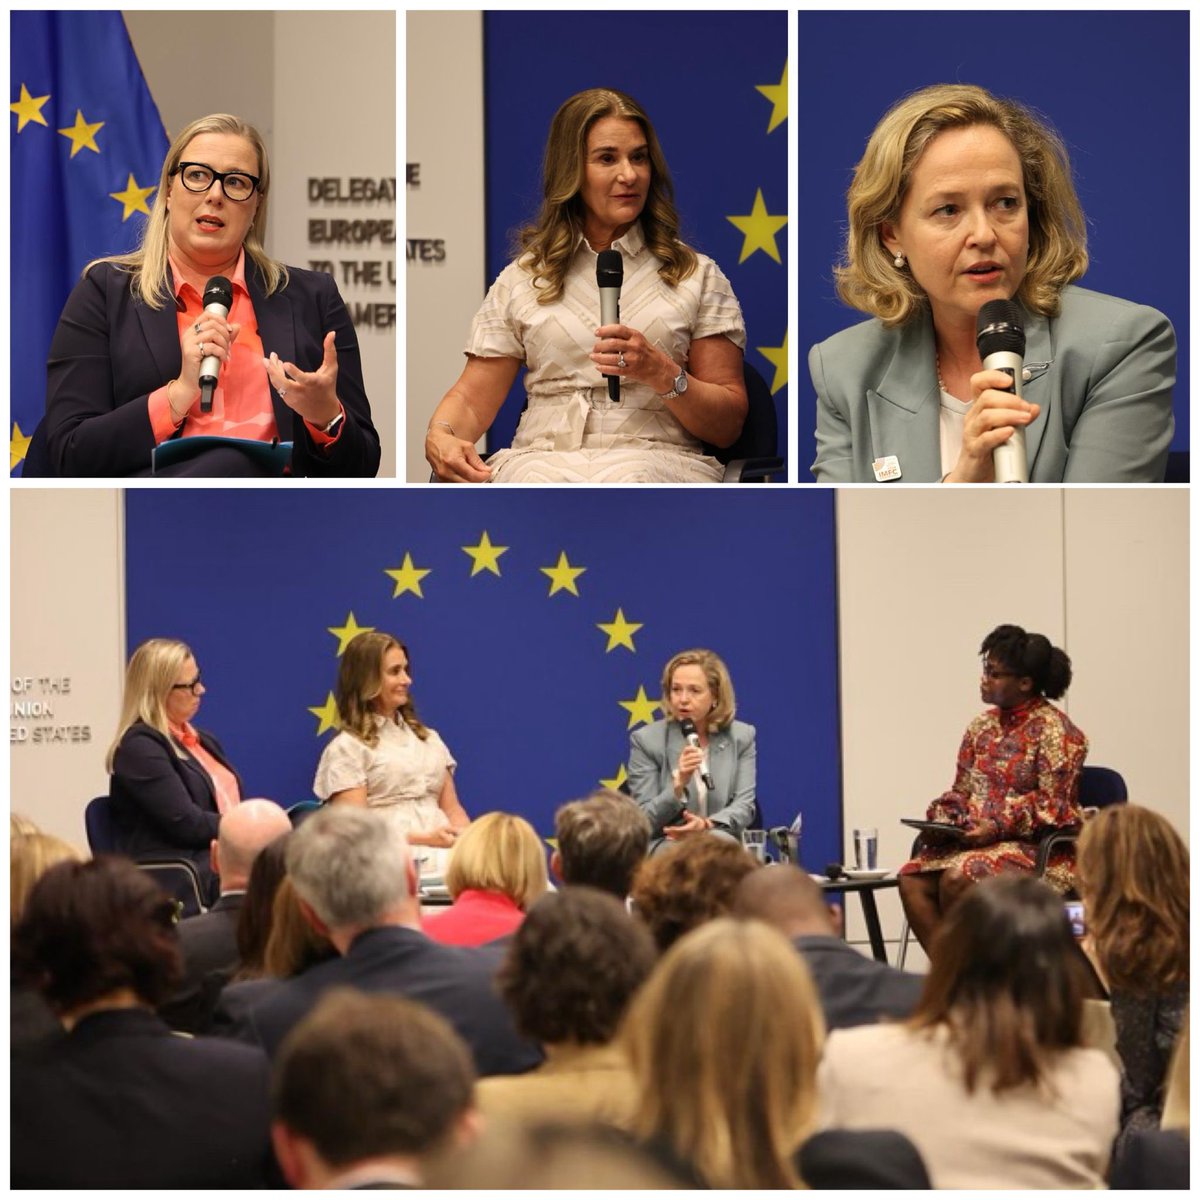 I was so pleased to join such a group of inspiring women - with @melindagates, @JuttaUrpilainen & Stellah Wairimu Bosire. Our @EIB 🤝🏼@EU_Commission 🤝🏼 @gatesfoundation partnership is supporting high-impact investment to empower women & girls around the world.